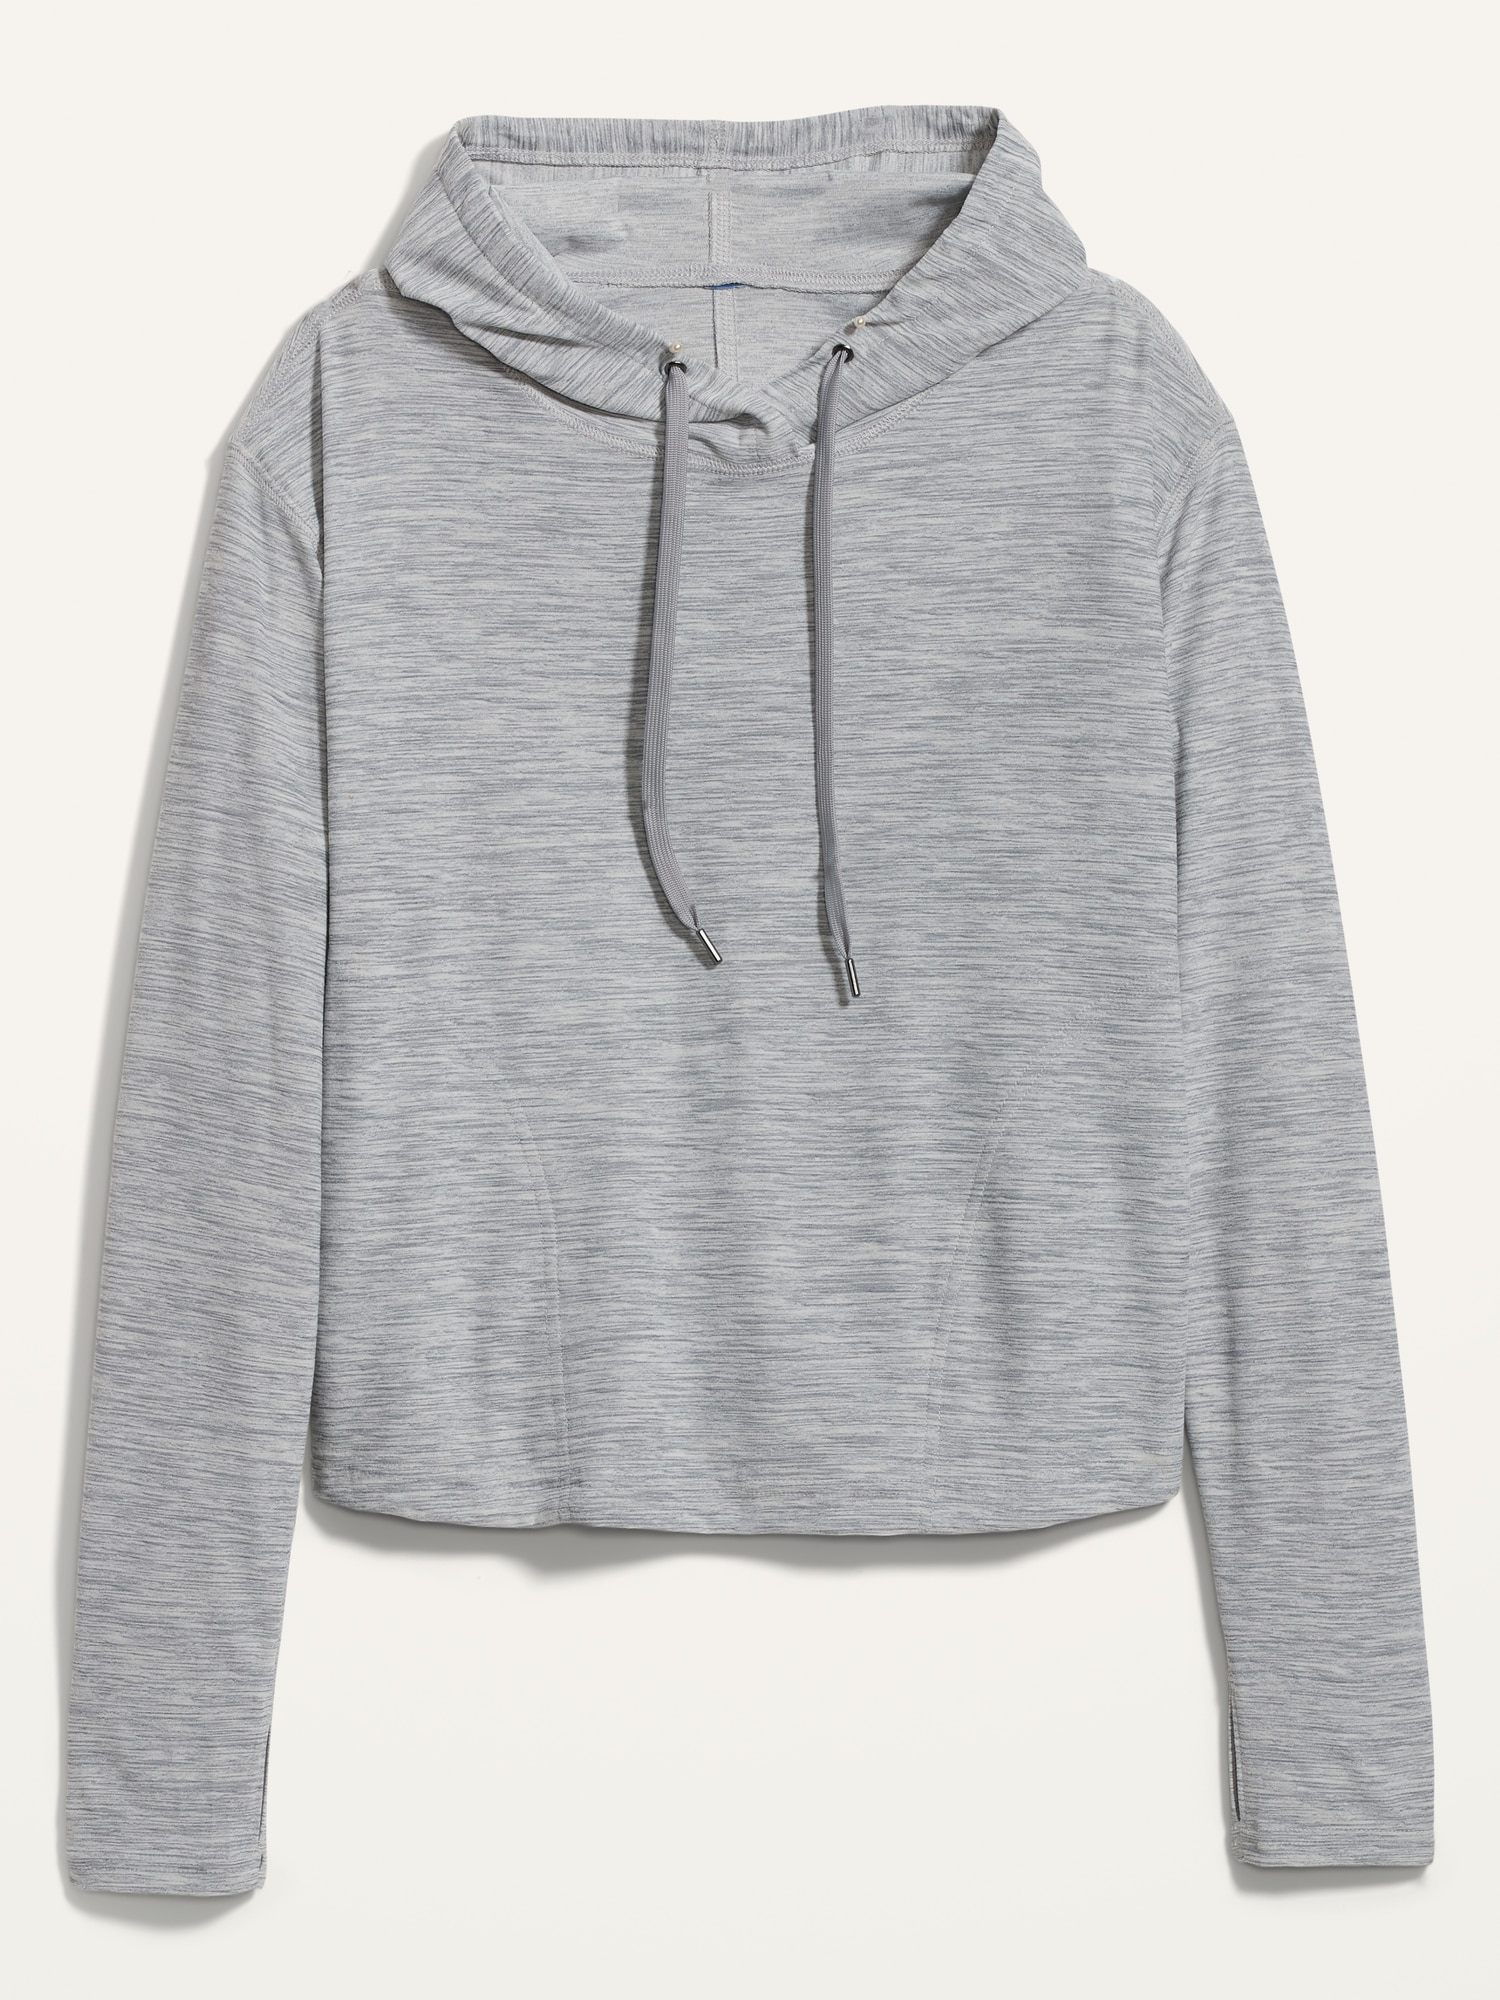 Breathe ON Slub-Knit Pullover Hoodie for Women | Old Navy